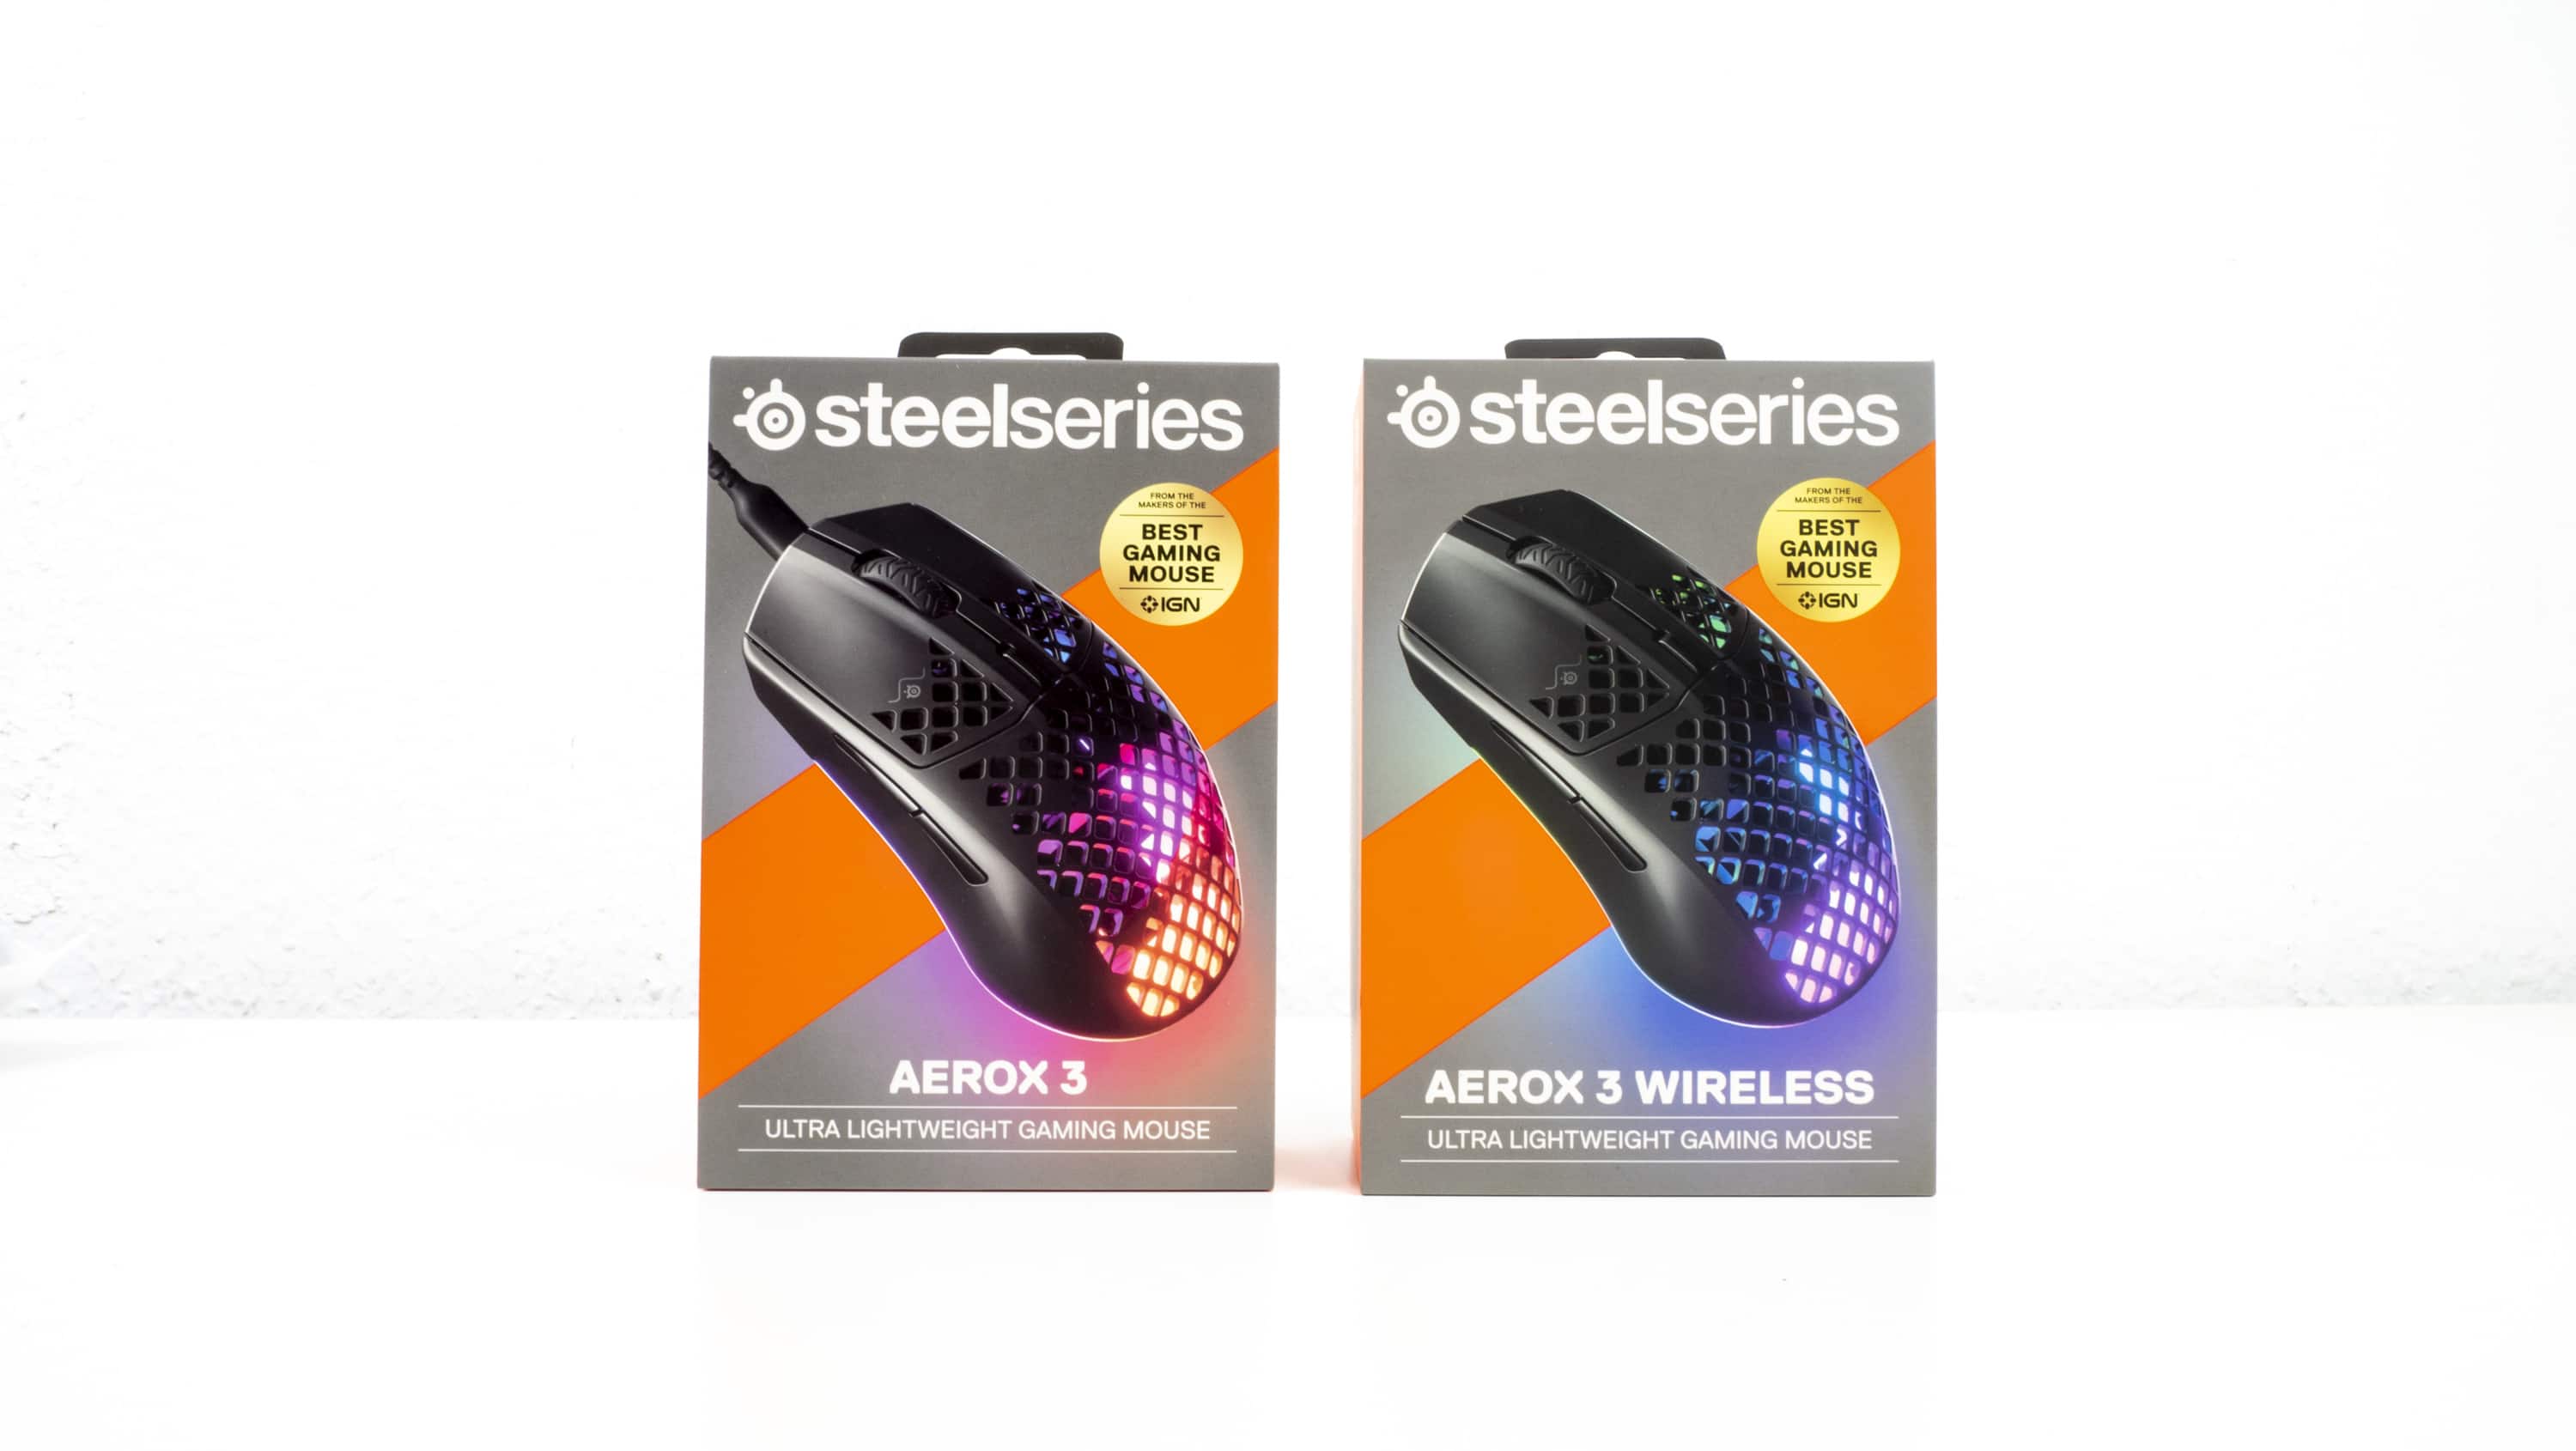 Aerox 3 & SteelSeries 3 light feather as (Almost) a test: Wireless in Aerox